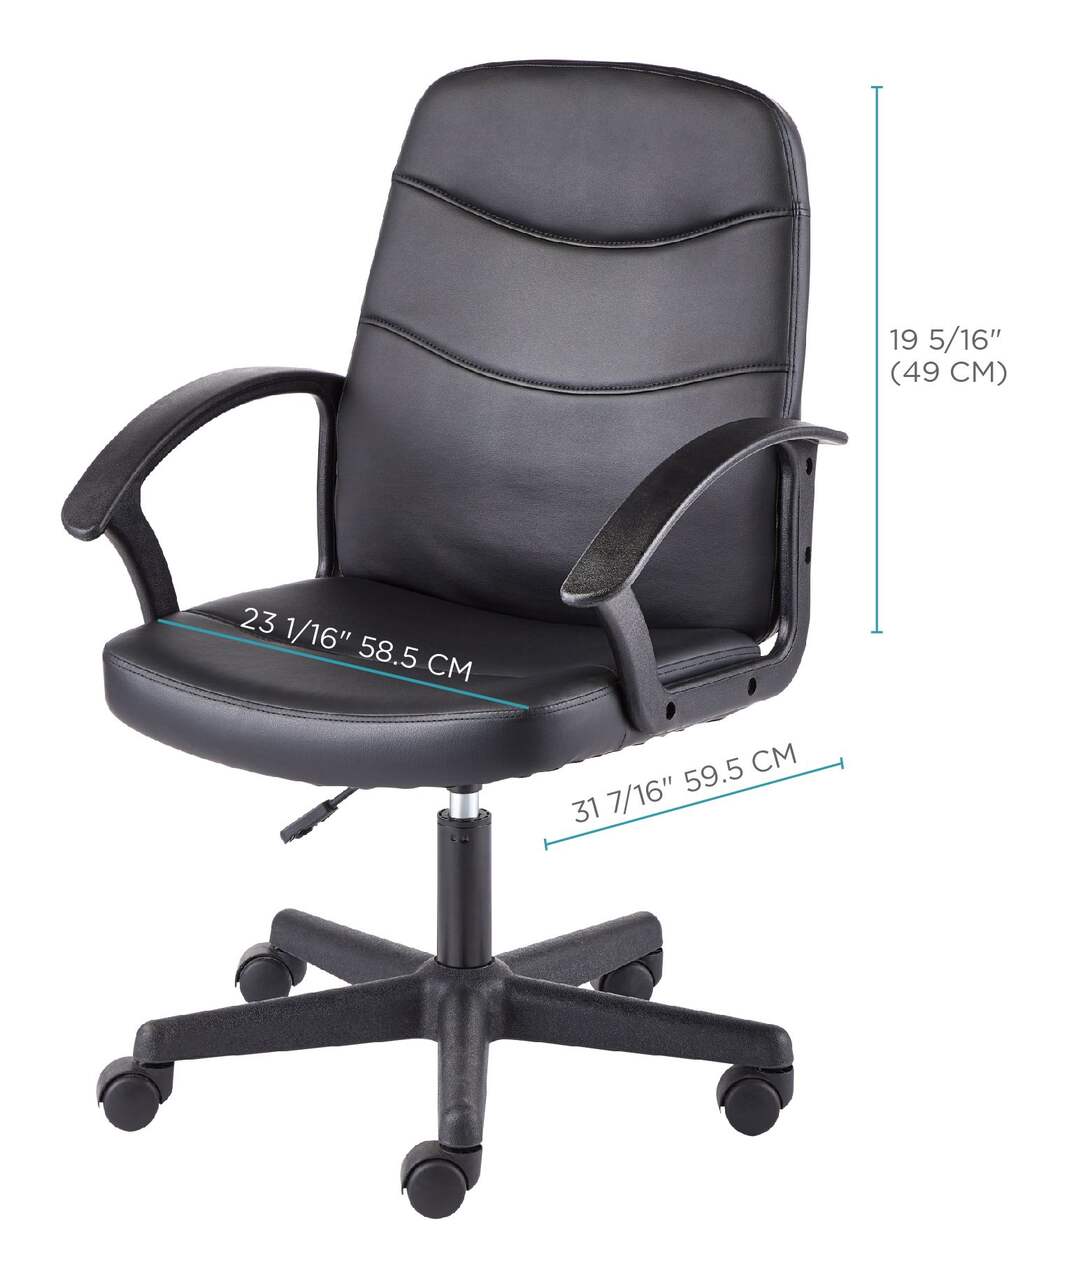 https://media-www.canadiantire.ca/product/living/home-decor/furniture/1680084/for-living-office-chair-black-1eaca512-f224-40b4-be9e-300bc79d0e52-jpgrendition.jpg?imdensity=1&imwidth=1244&impolicy=mZoom